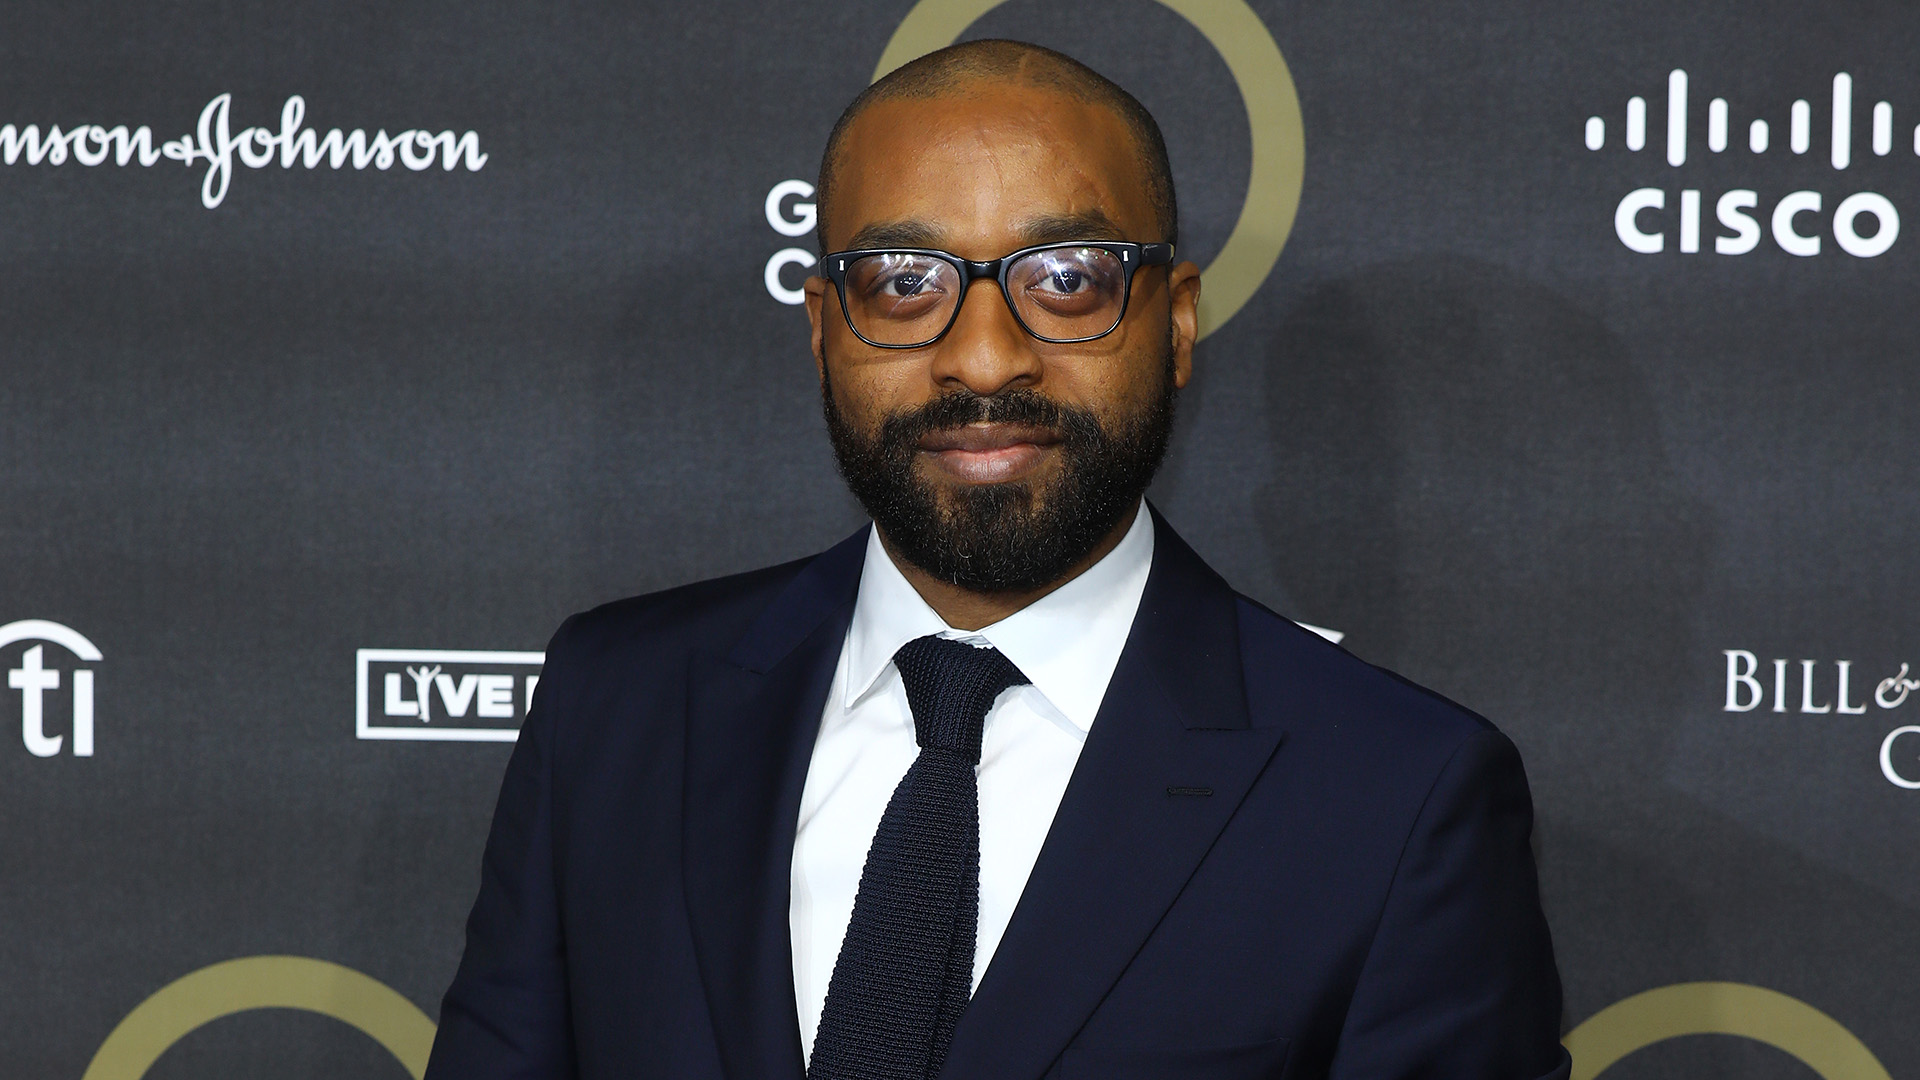 Casting News: Chiwetel Ejiofor to Star in 'The Man Who Fell to Earth' Series